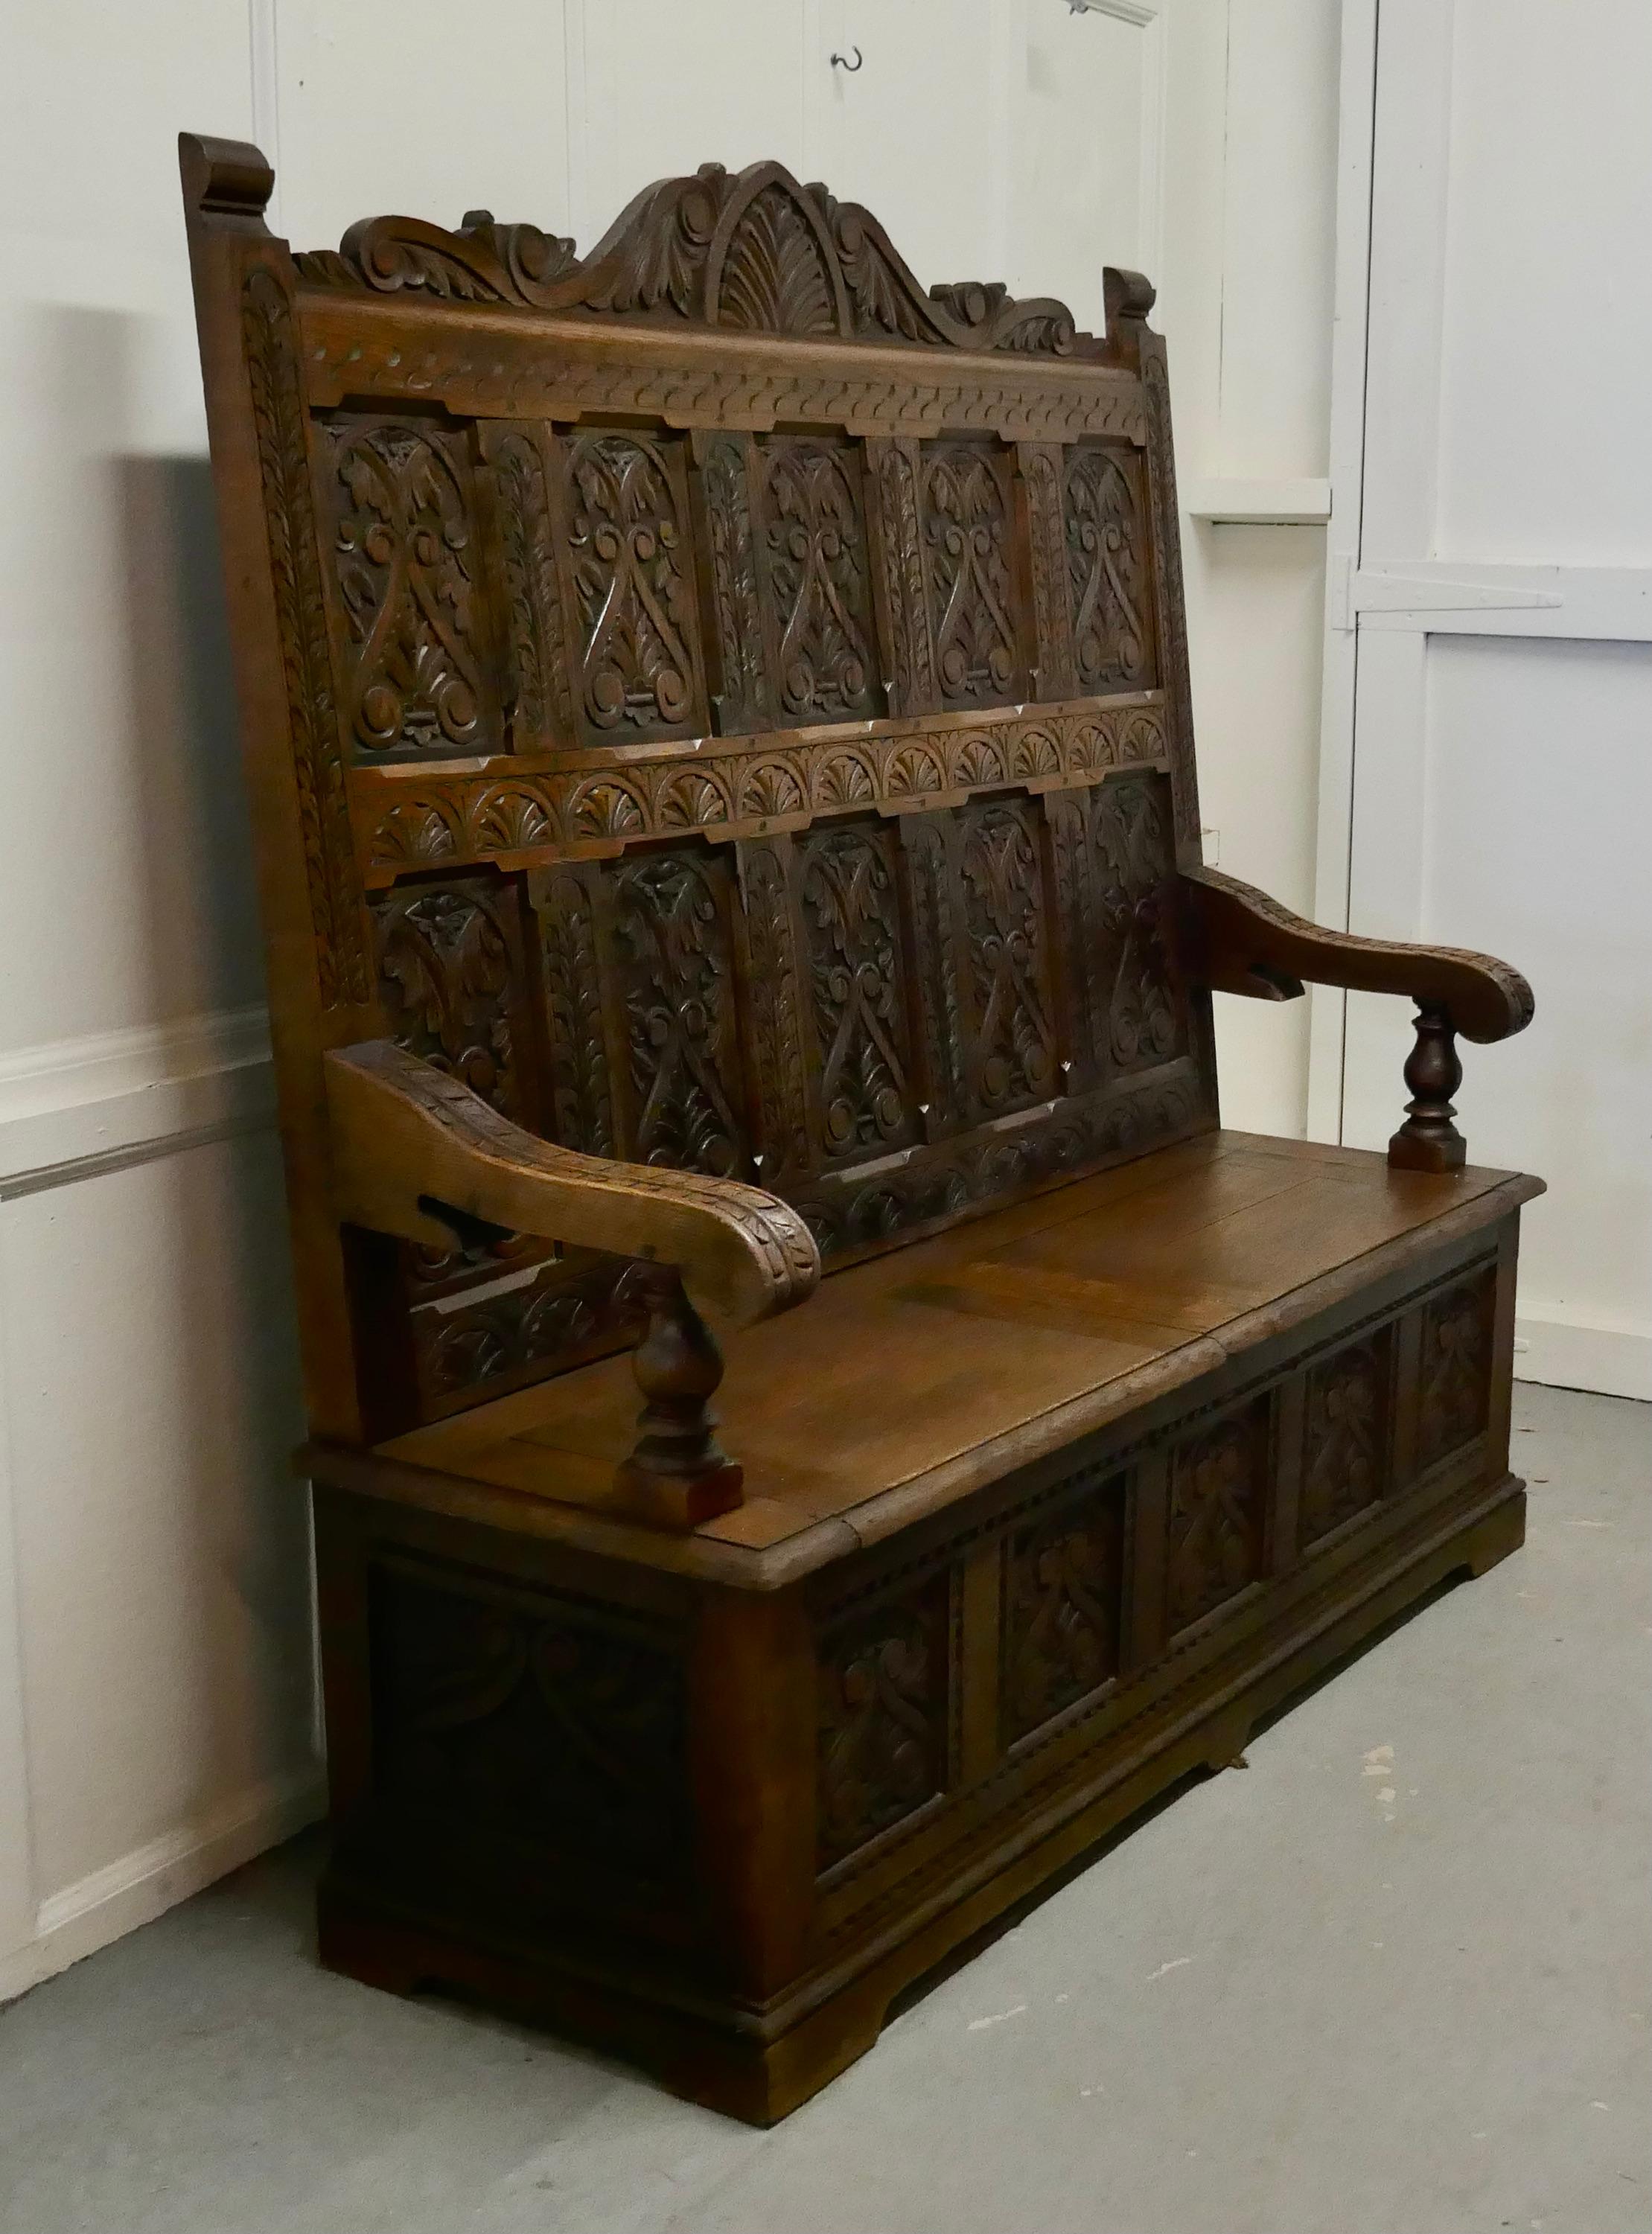 Early 19th century welsh high back carved oak box settle

The settle has a superbly carved high back panel with 10 panels carved with a Celtic pattern, and 5 further carved panels at the bottom, the seat opens in 2 sections for storage
The bench